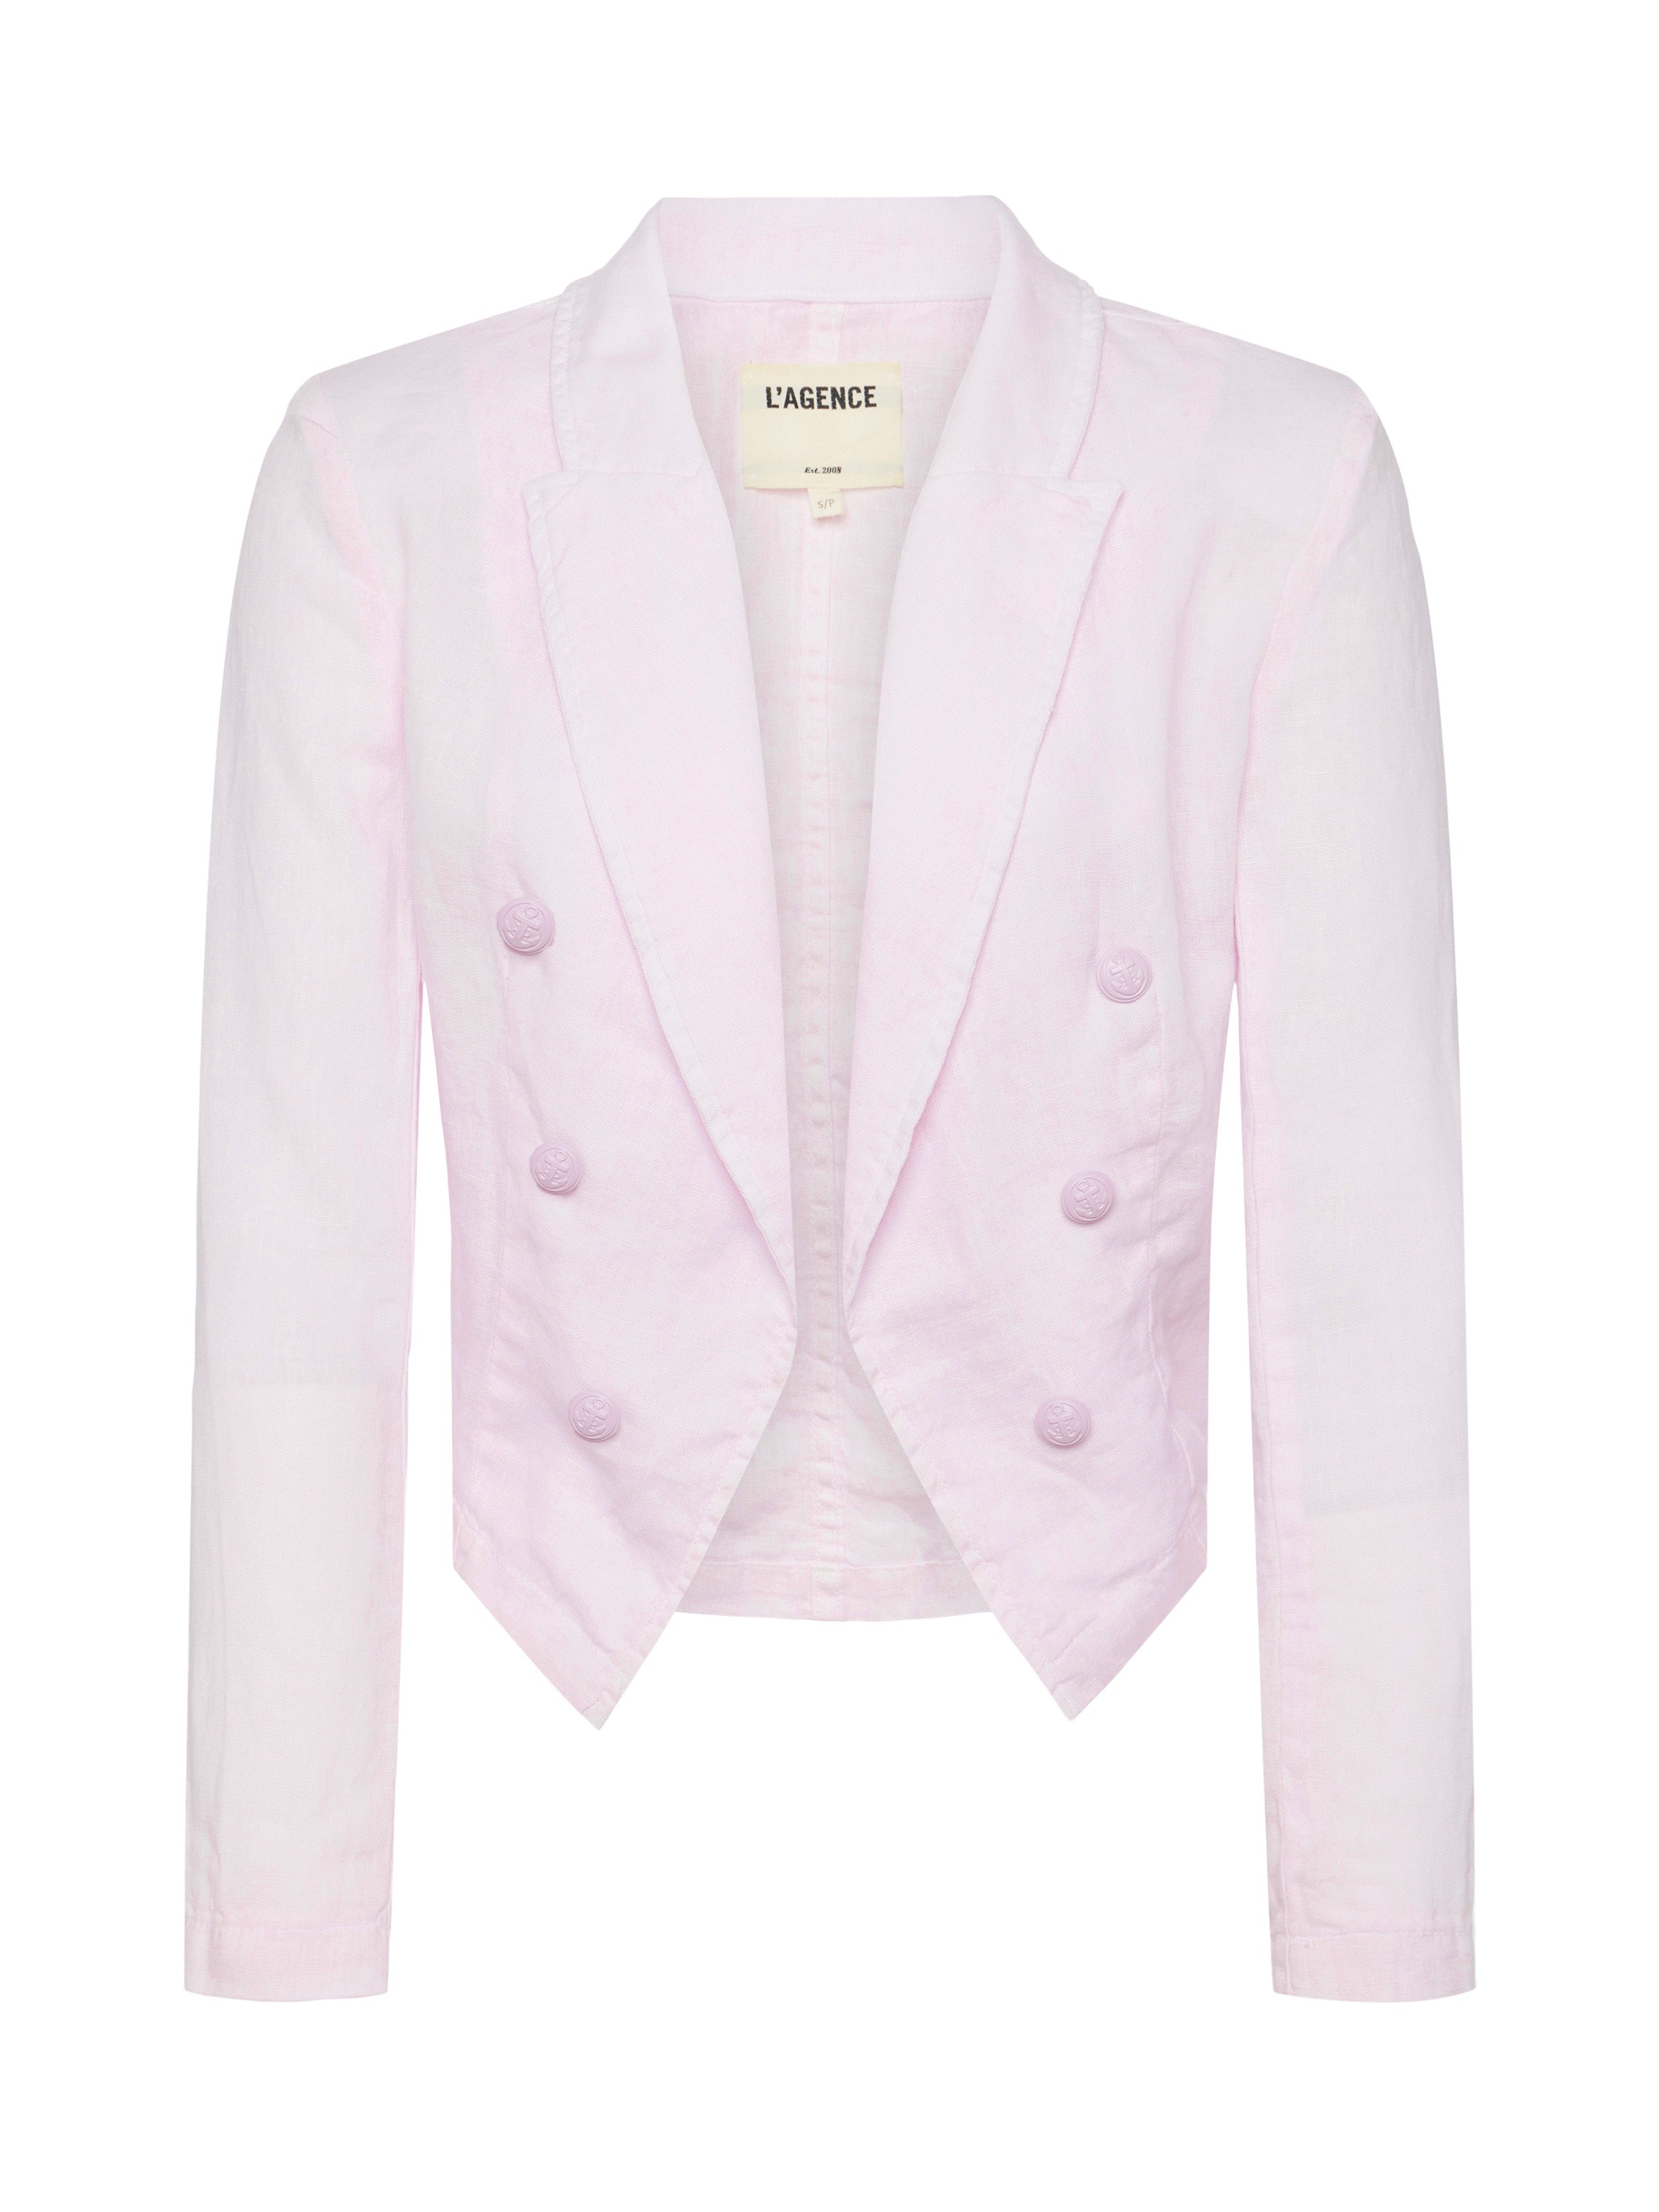 Wayne Crop Double Breasted Jacket in Lilac Snow